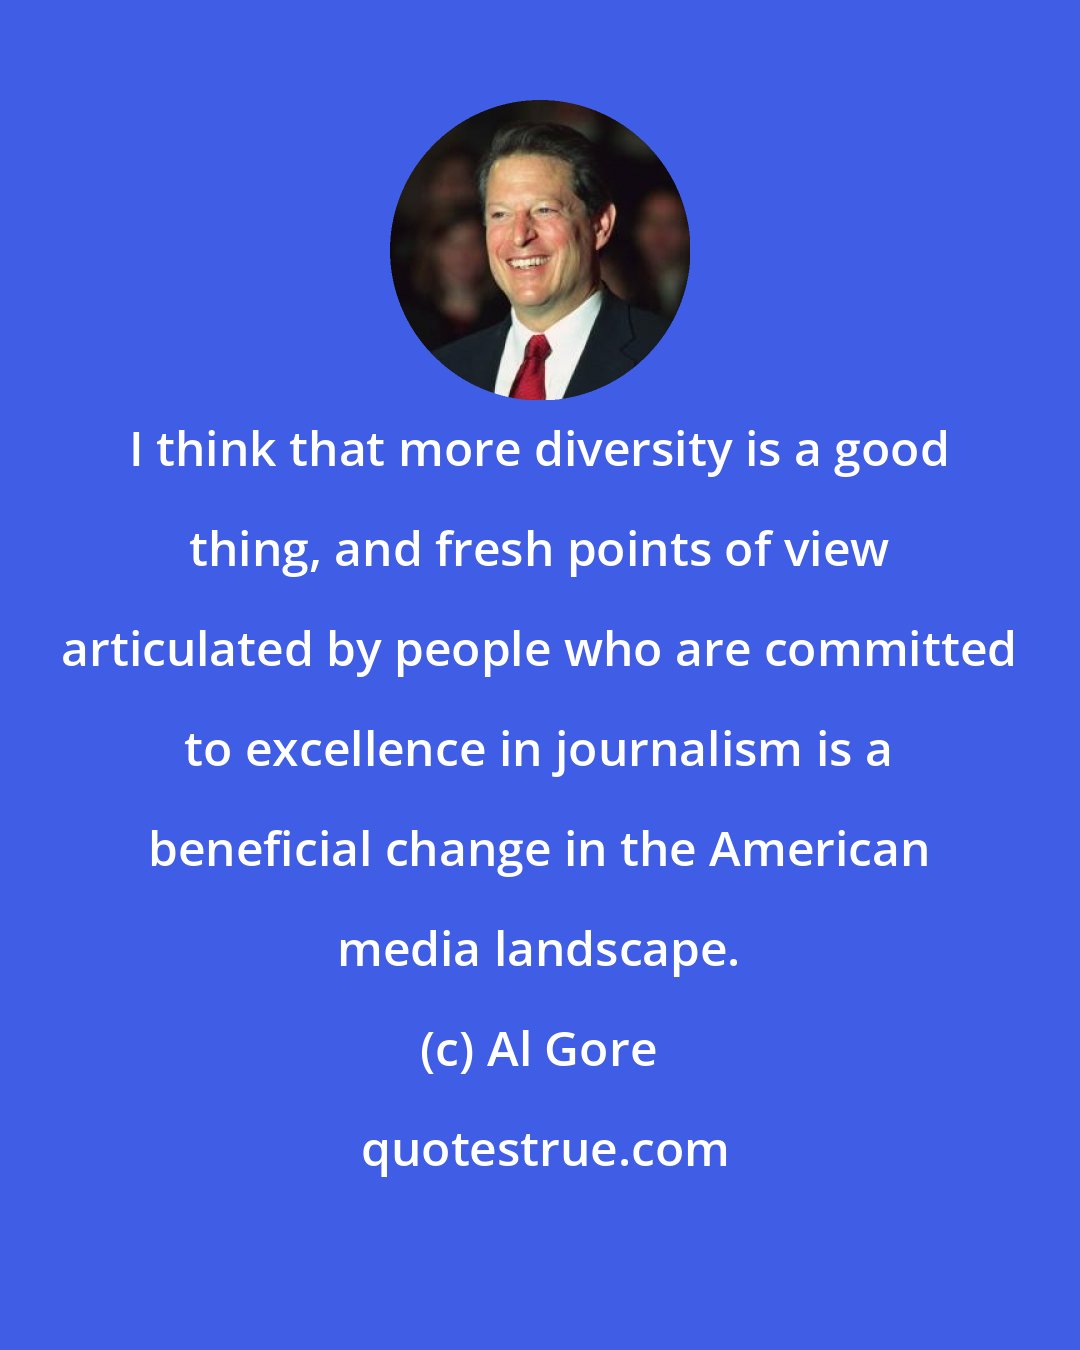 Al Gore: I think that more diversity is a good thing, and fresh points of view articulated by people who are committed to excellence in journalism is a beneficial change in the American media landscape.